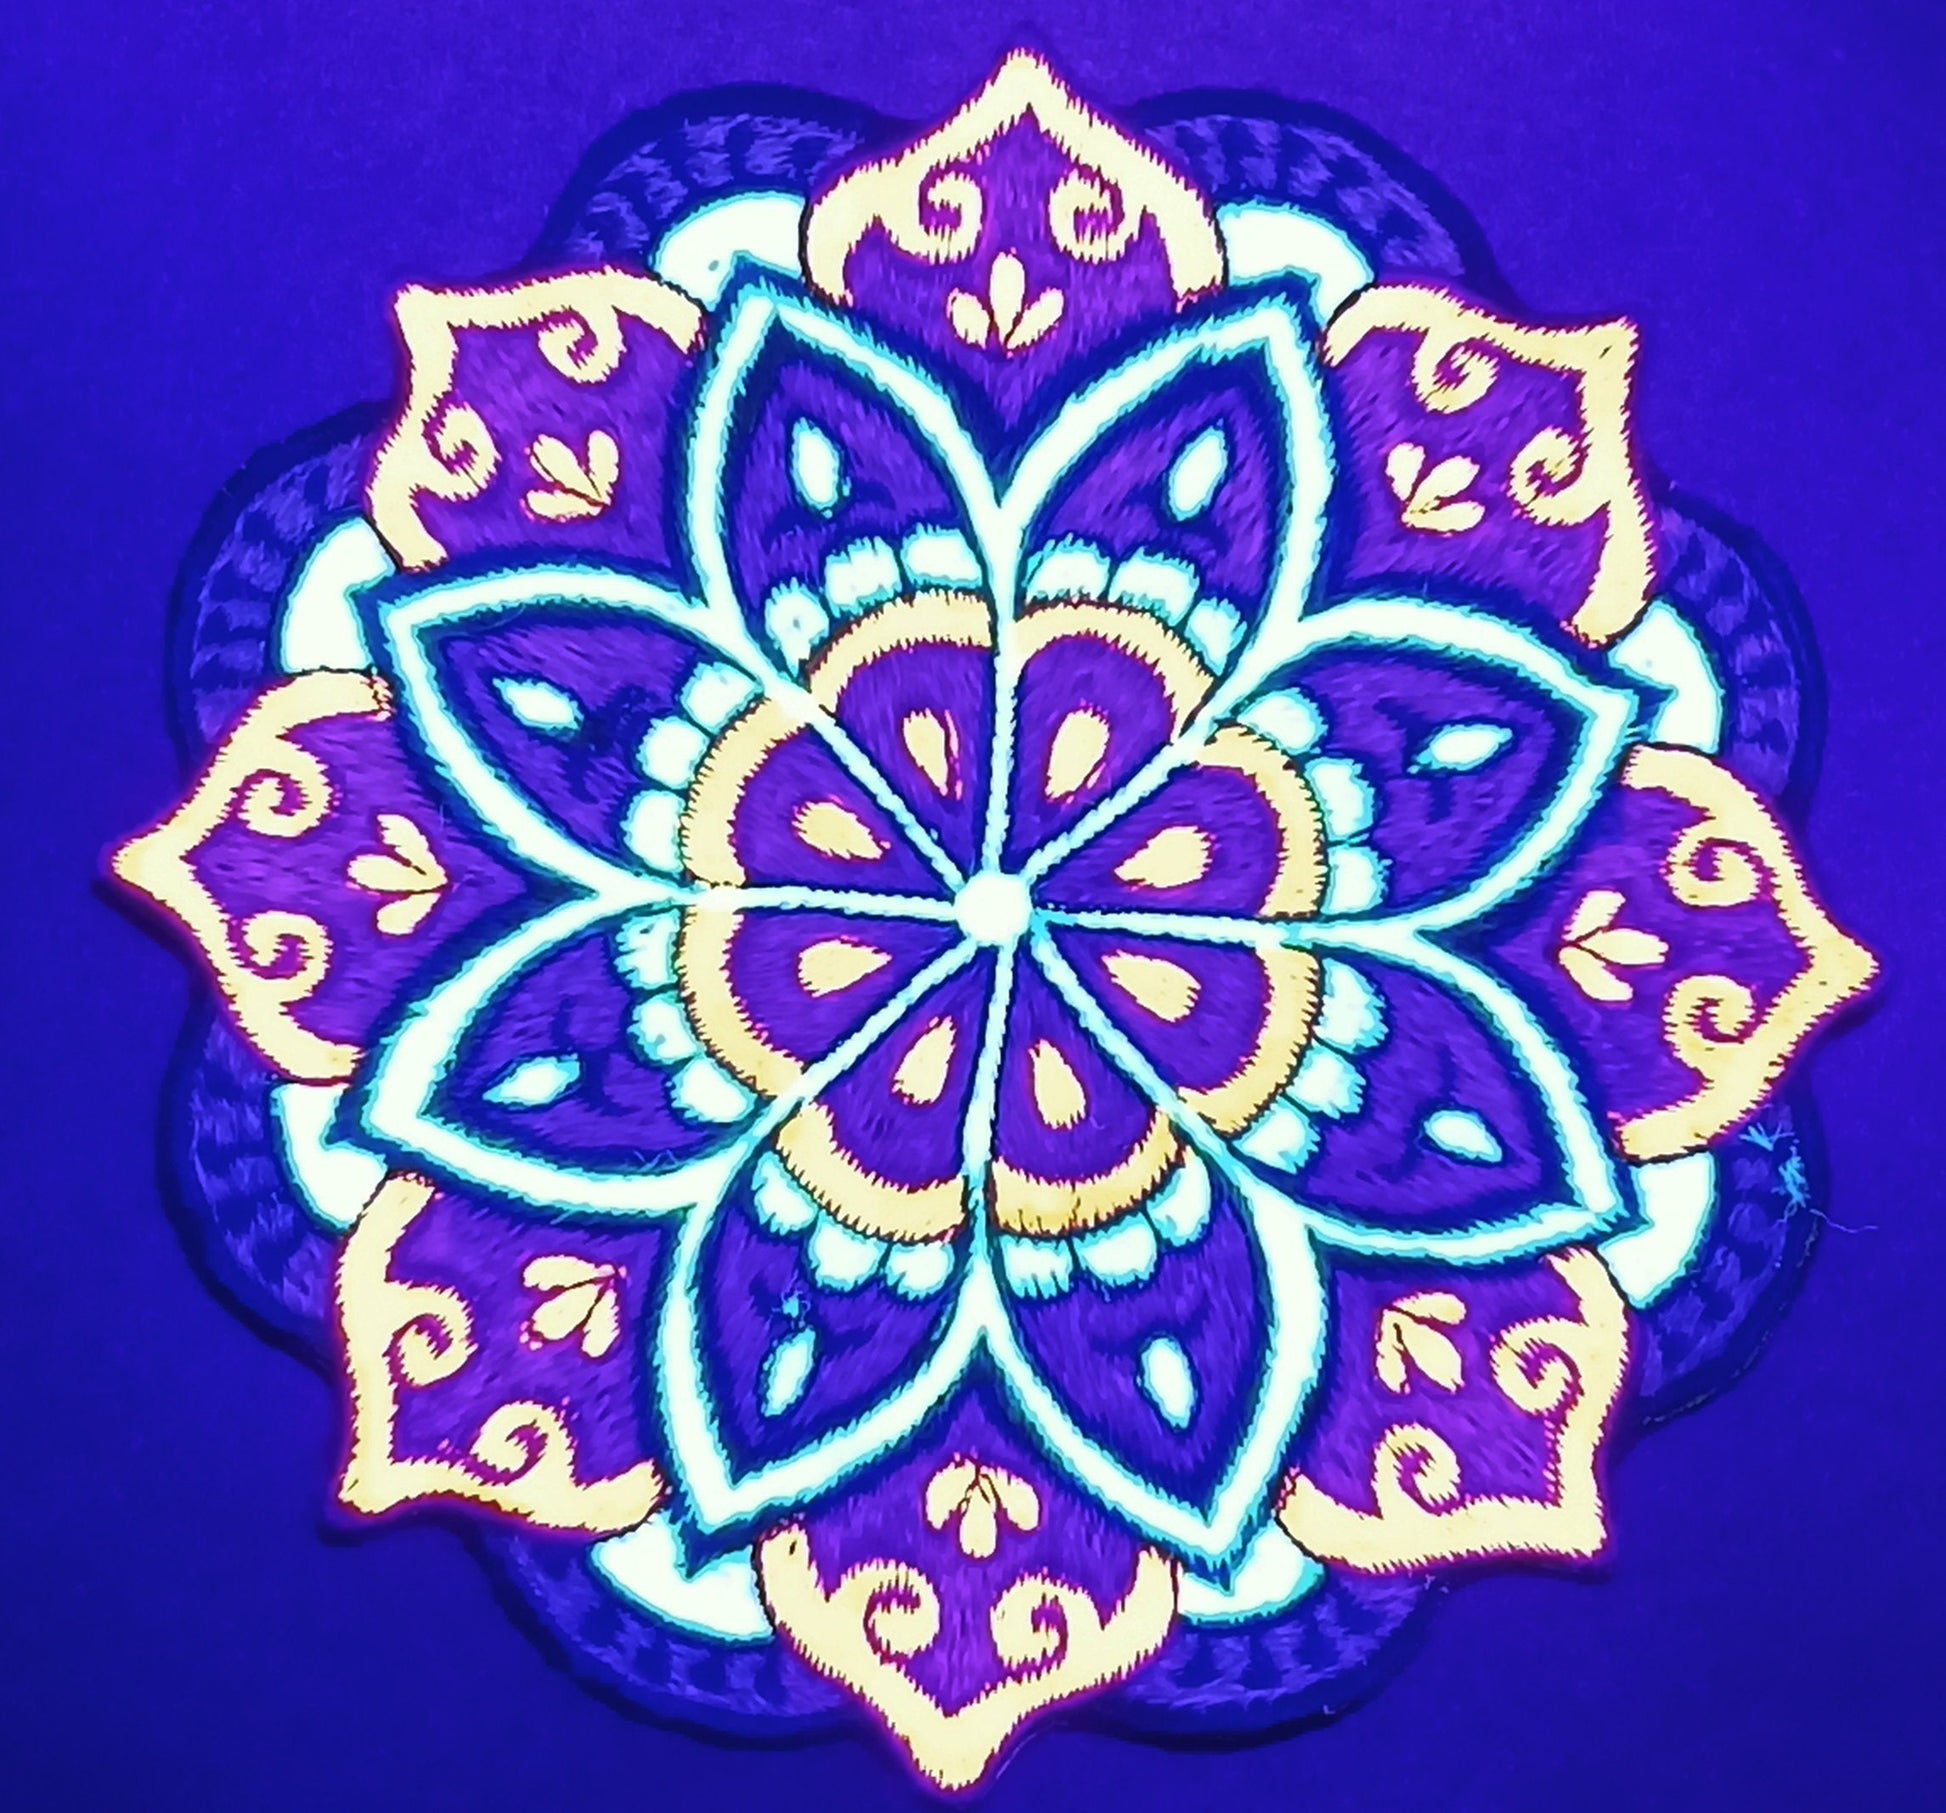 Peyote Mandala Medium Patch embroidery art with blacklight colors sacred cactus mescaline mandala higher psychedelic connection to life